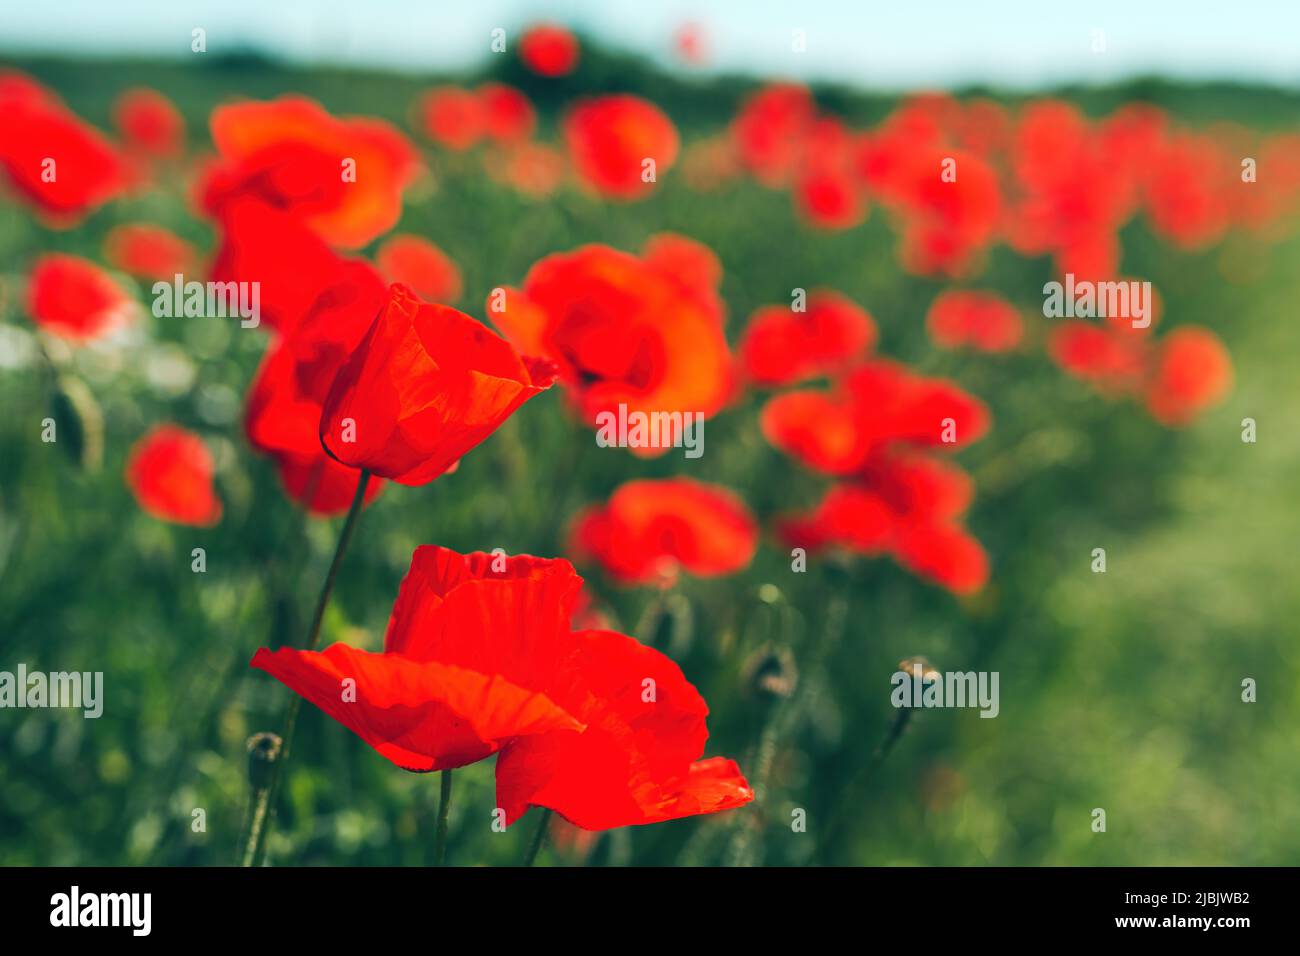 Papaver rhoeas or red poppy flower in meadow. This flowering plant is used a symbol of remembrance of the fallen soldiers. Selective focus Stock Photo